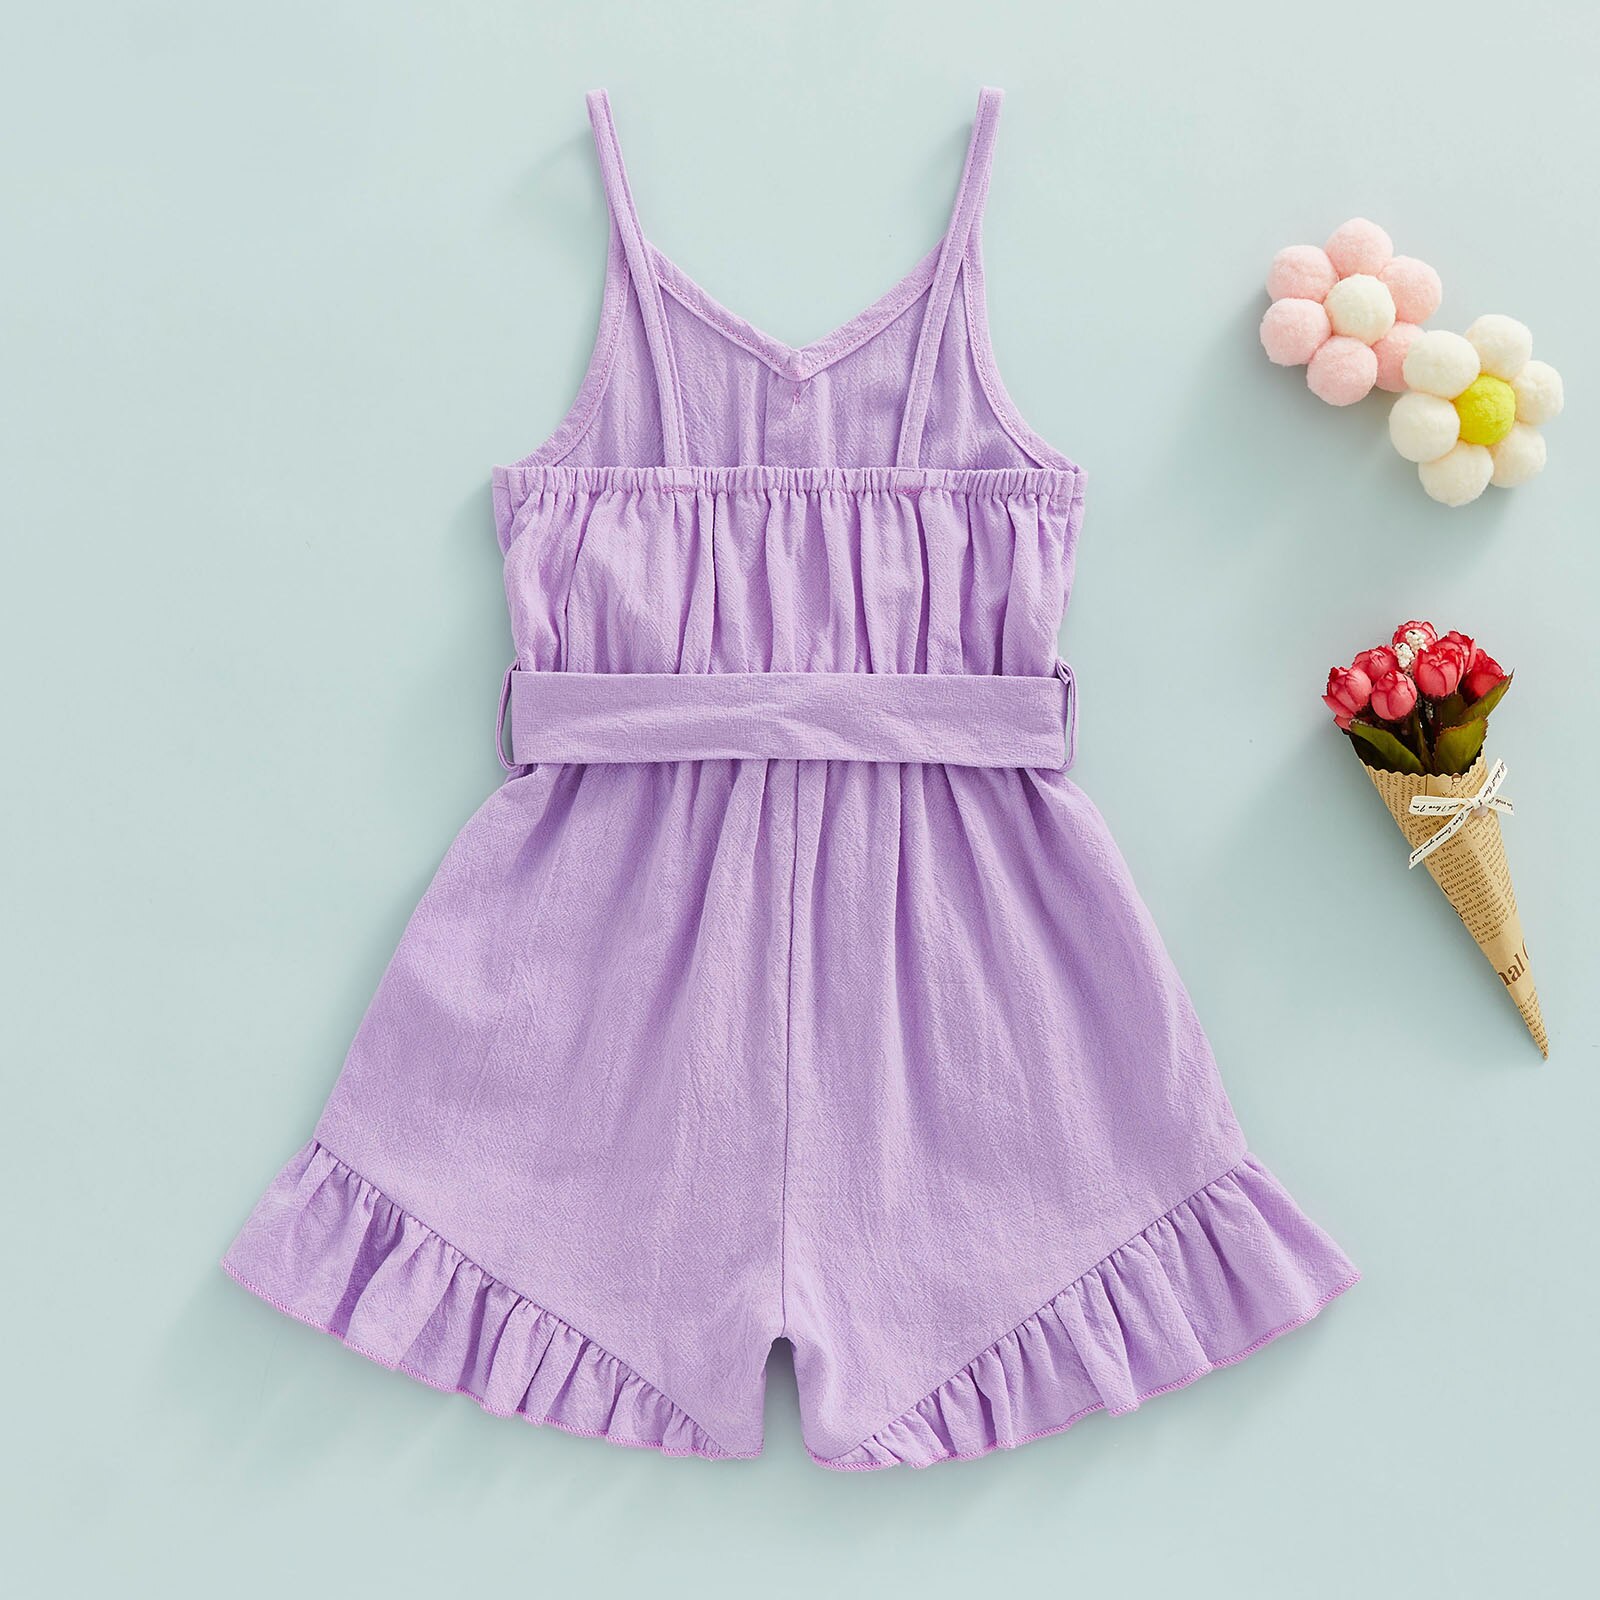 Toddler-Kid-Baby-Girls-Sling-Playsuit-Spaghetti-Straps-V-Neck-Buttons-Sleeveless-Ruffle-Hem-Solid-Color-2